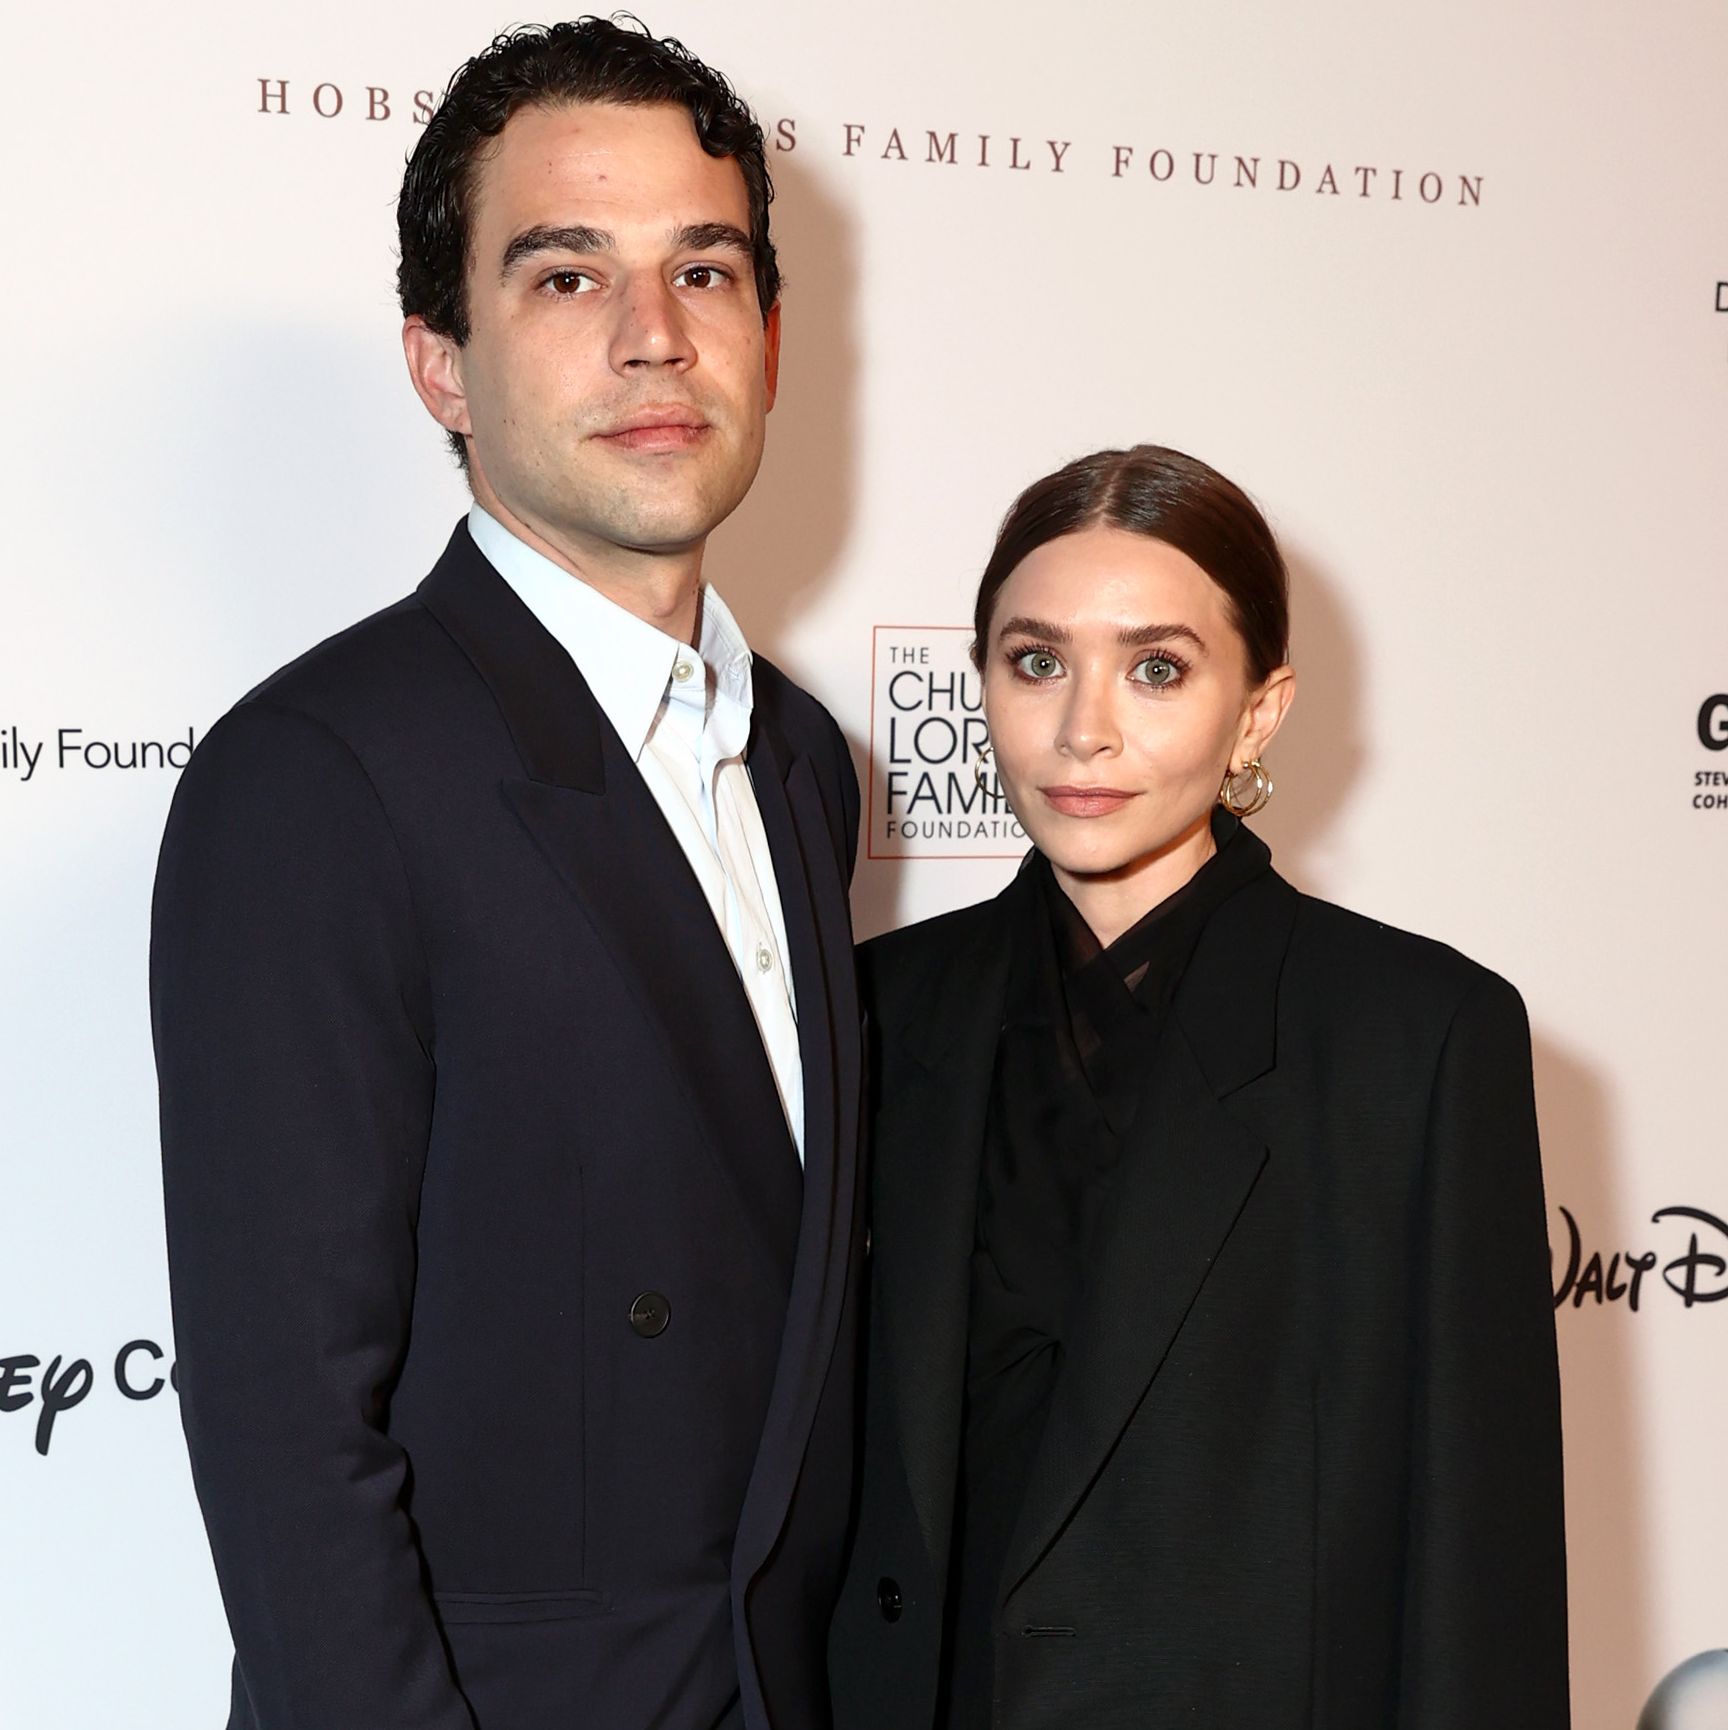 Ashley Olsen Is a Mom! The Star and Her Husband Louis Eisner﻿ Just Welcomed a Baby Boy